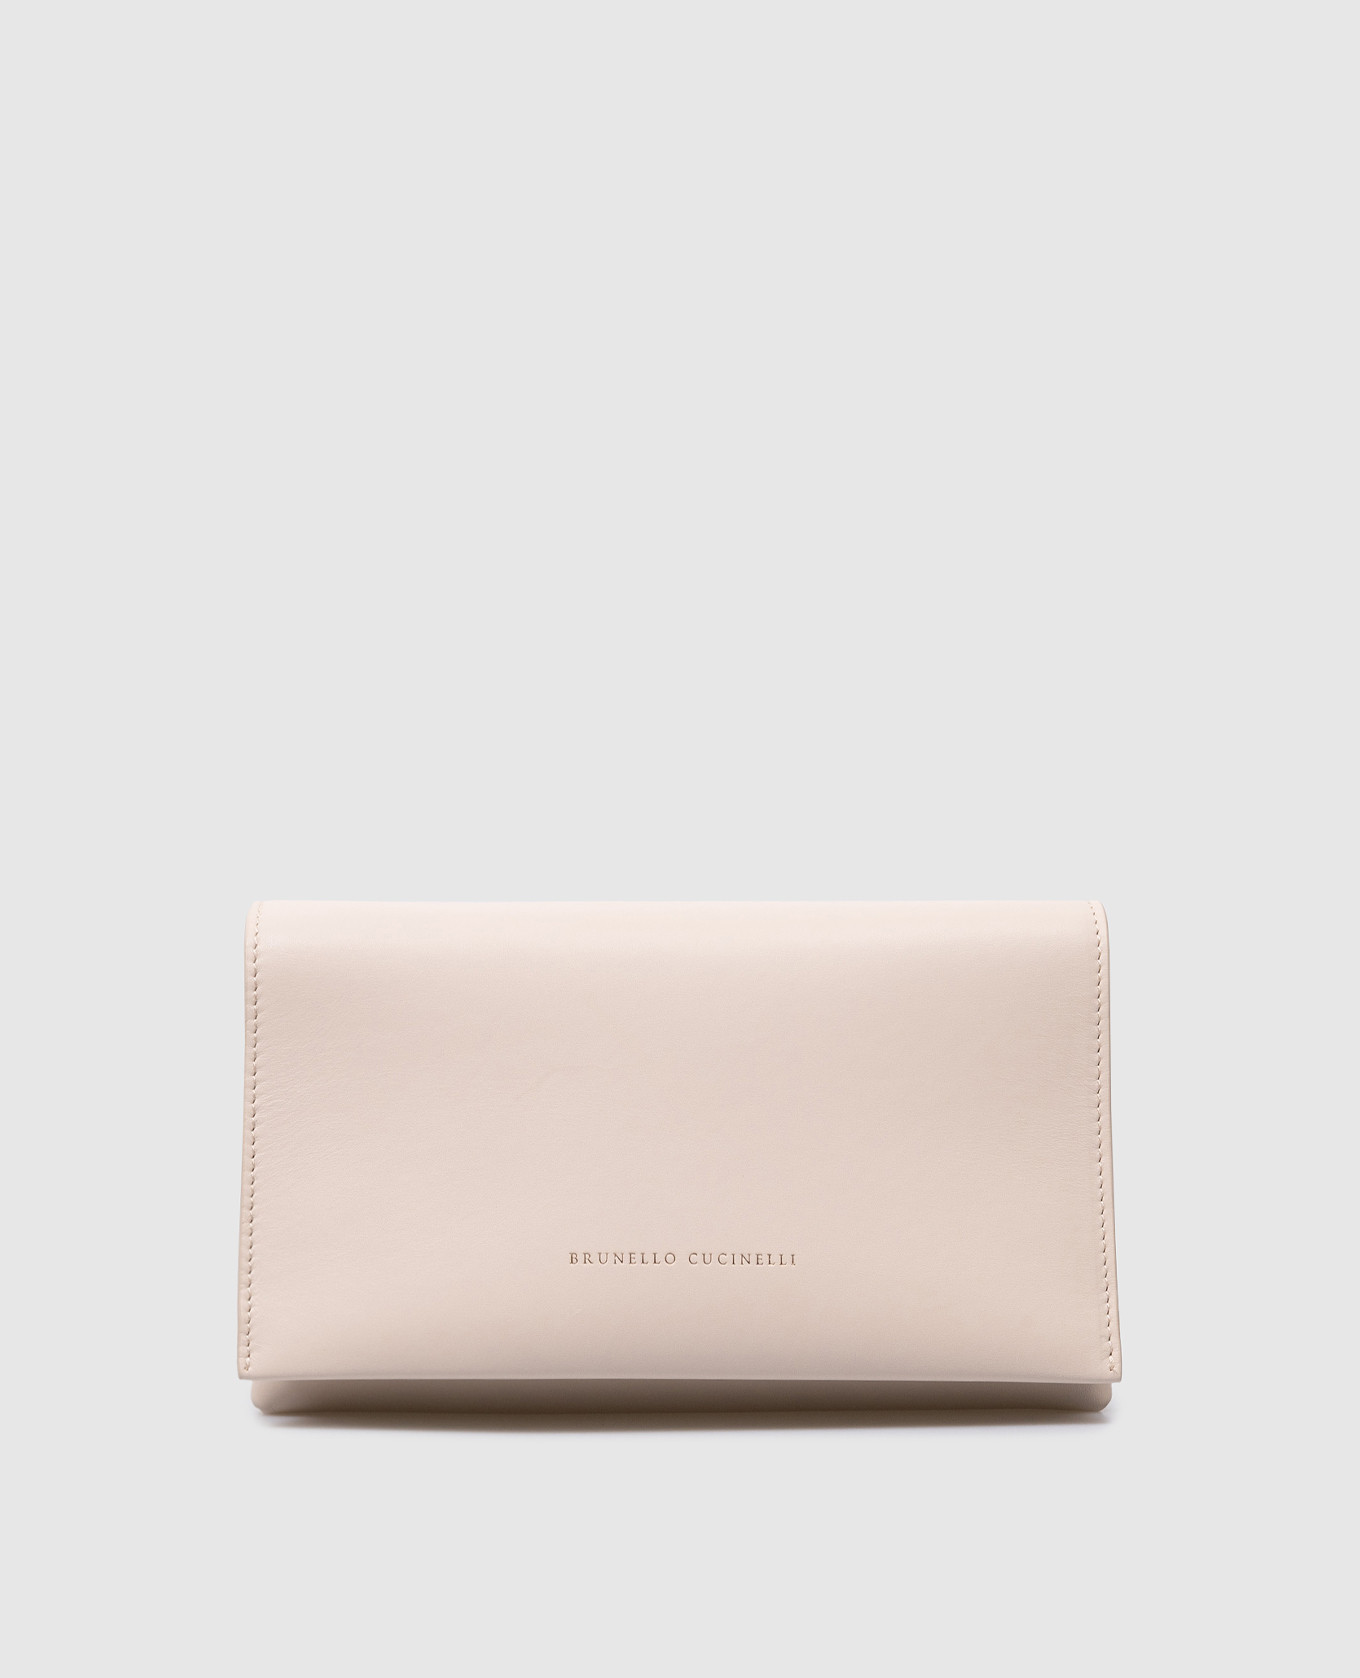 Beige leather clutch with logo